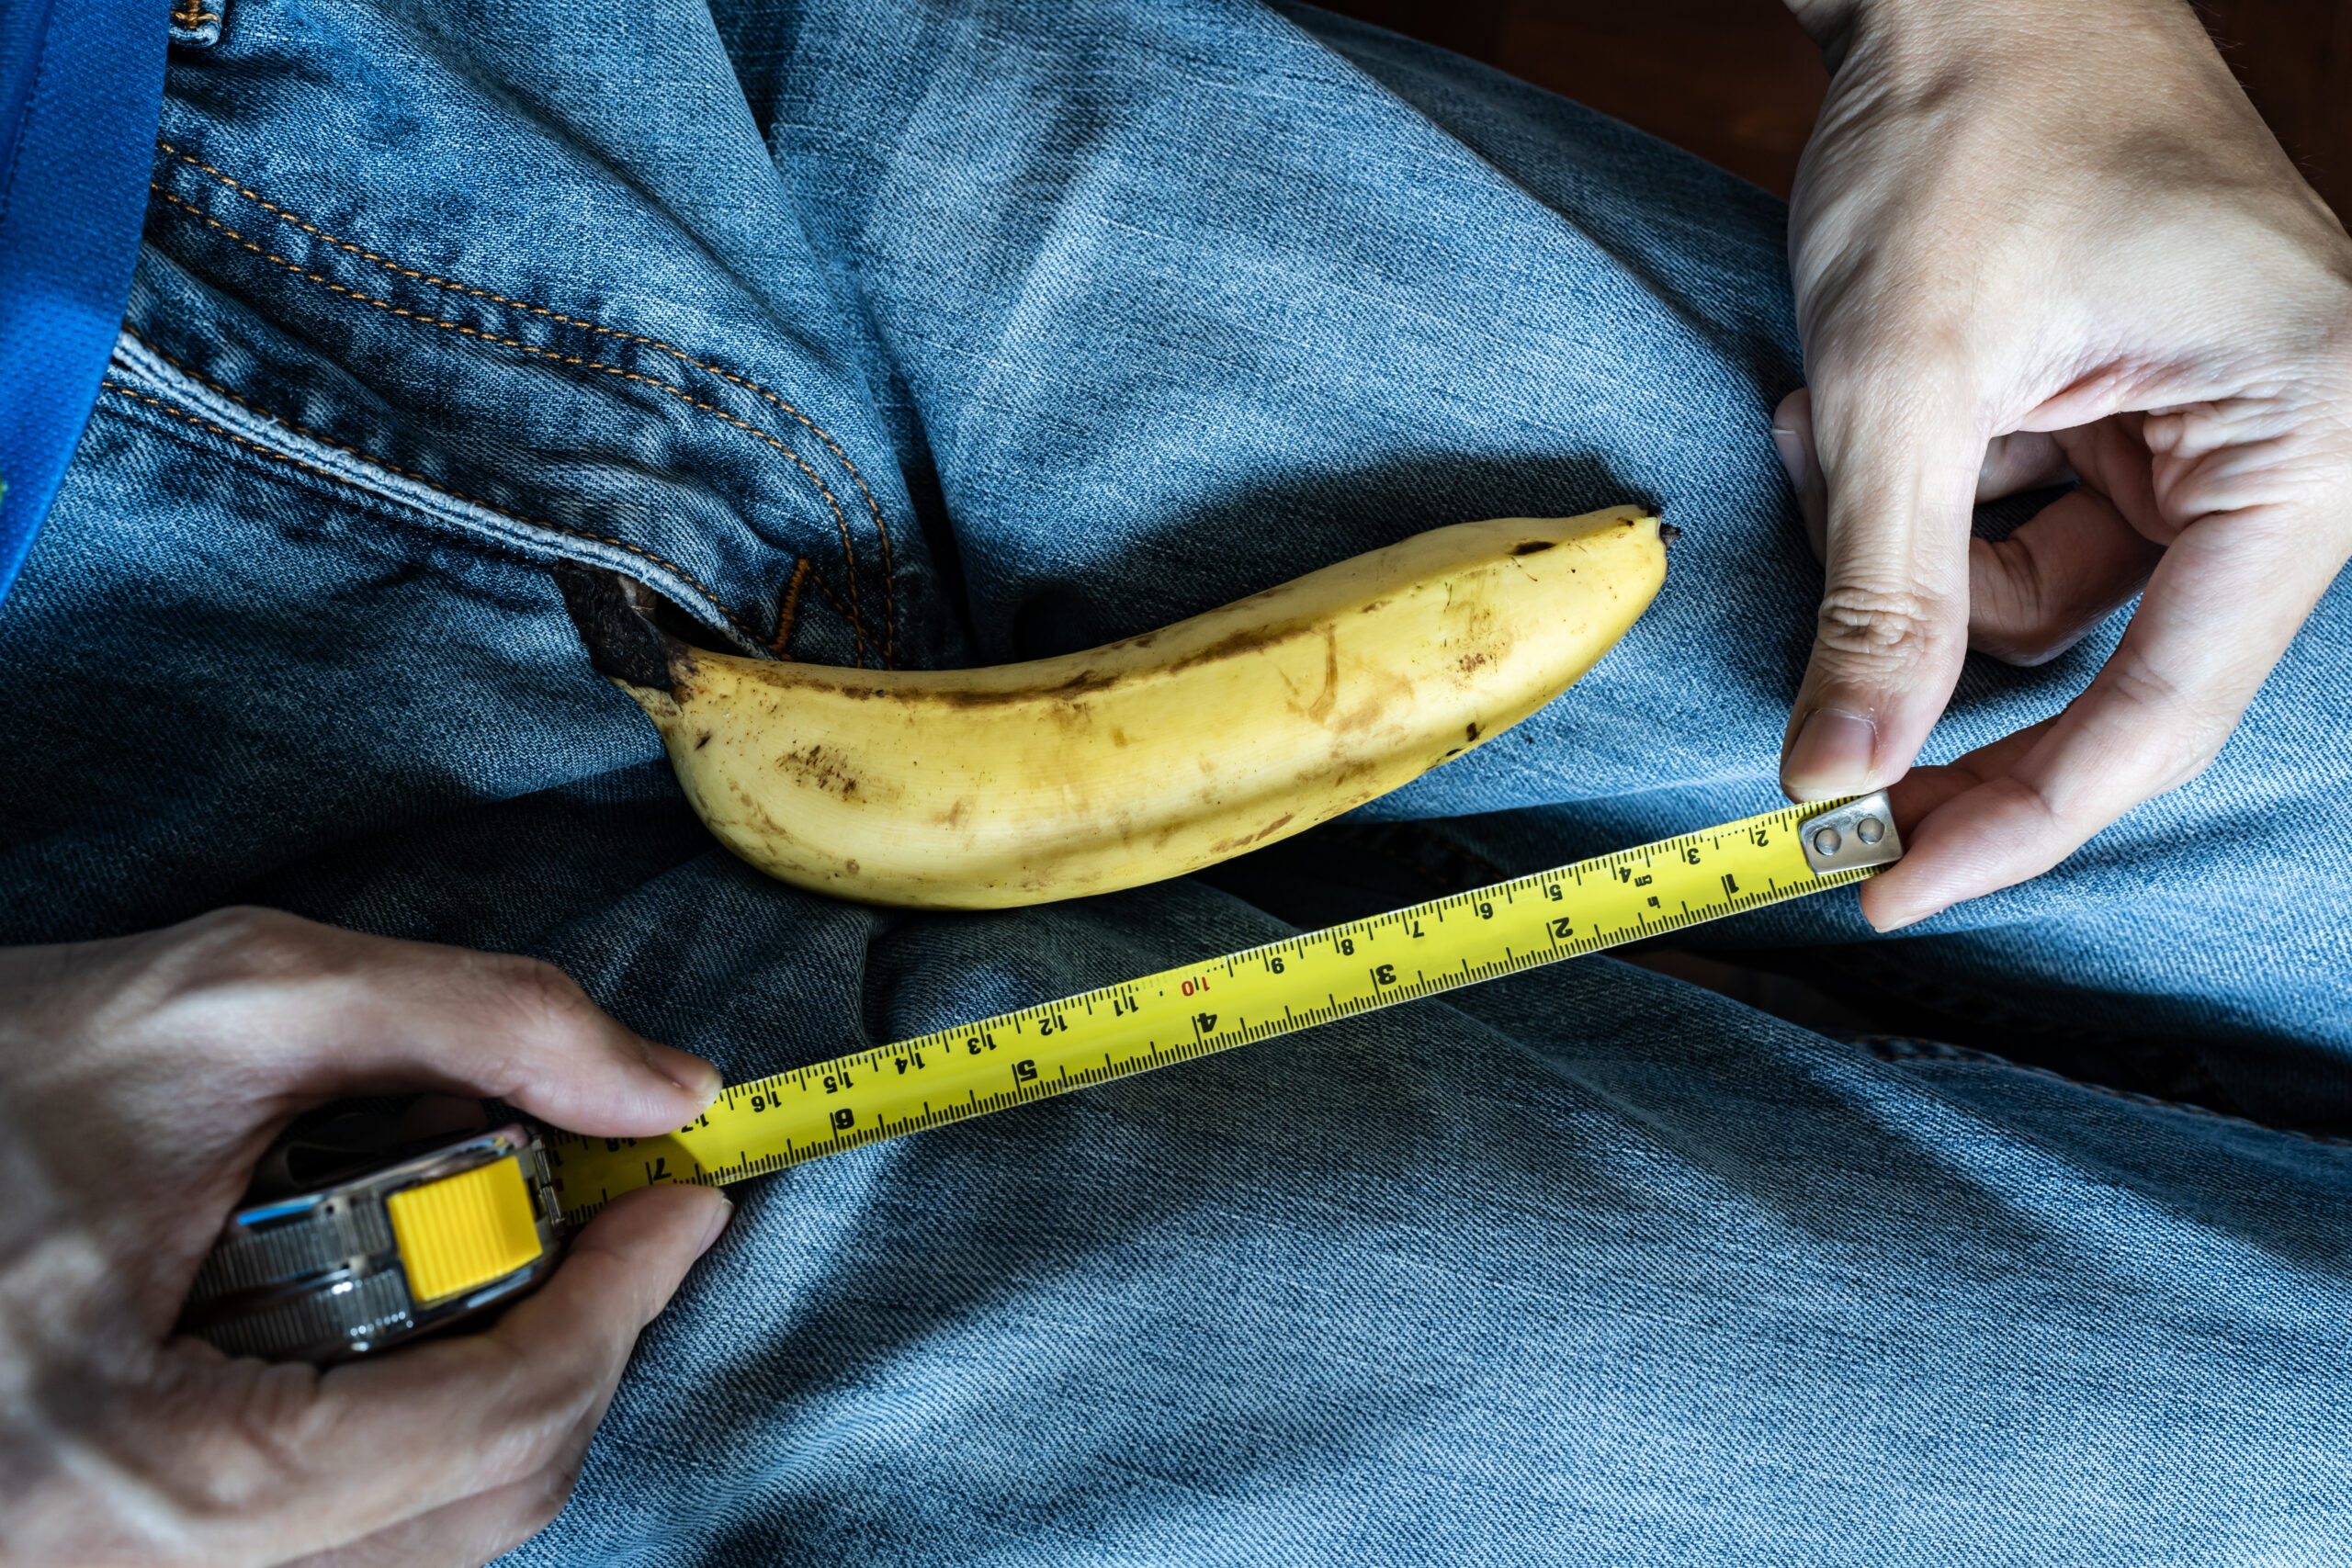 A man measures a size of a banana with measure tape